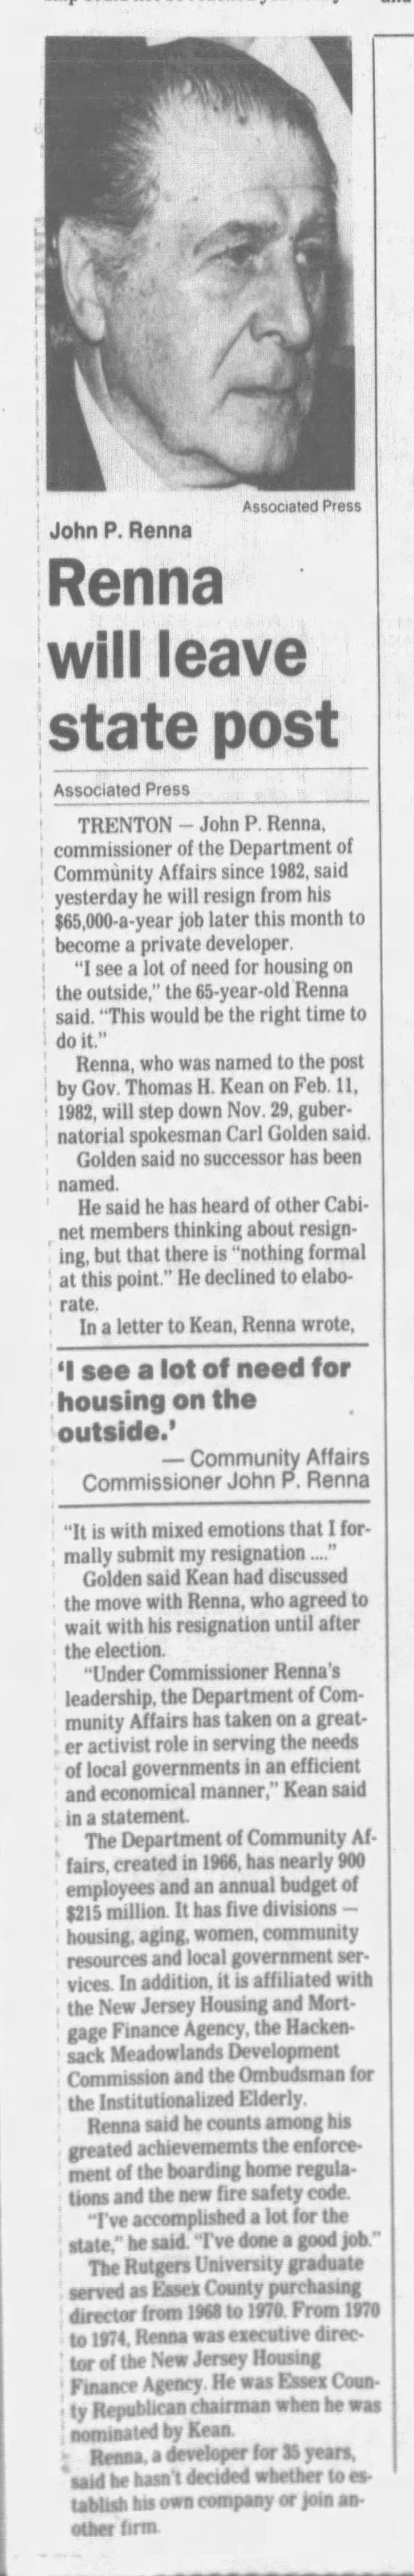 Renna Will Leave State Post. Daily Record (Morristown, New Jersey) 10, Nov 1985, page 3